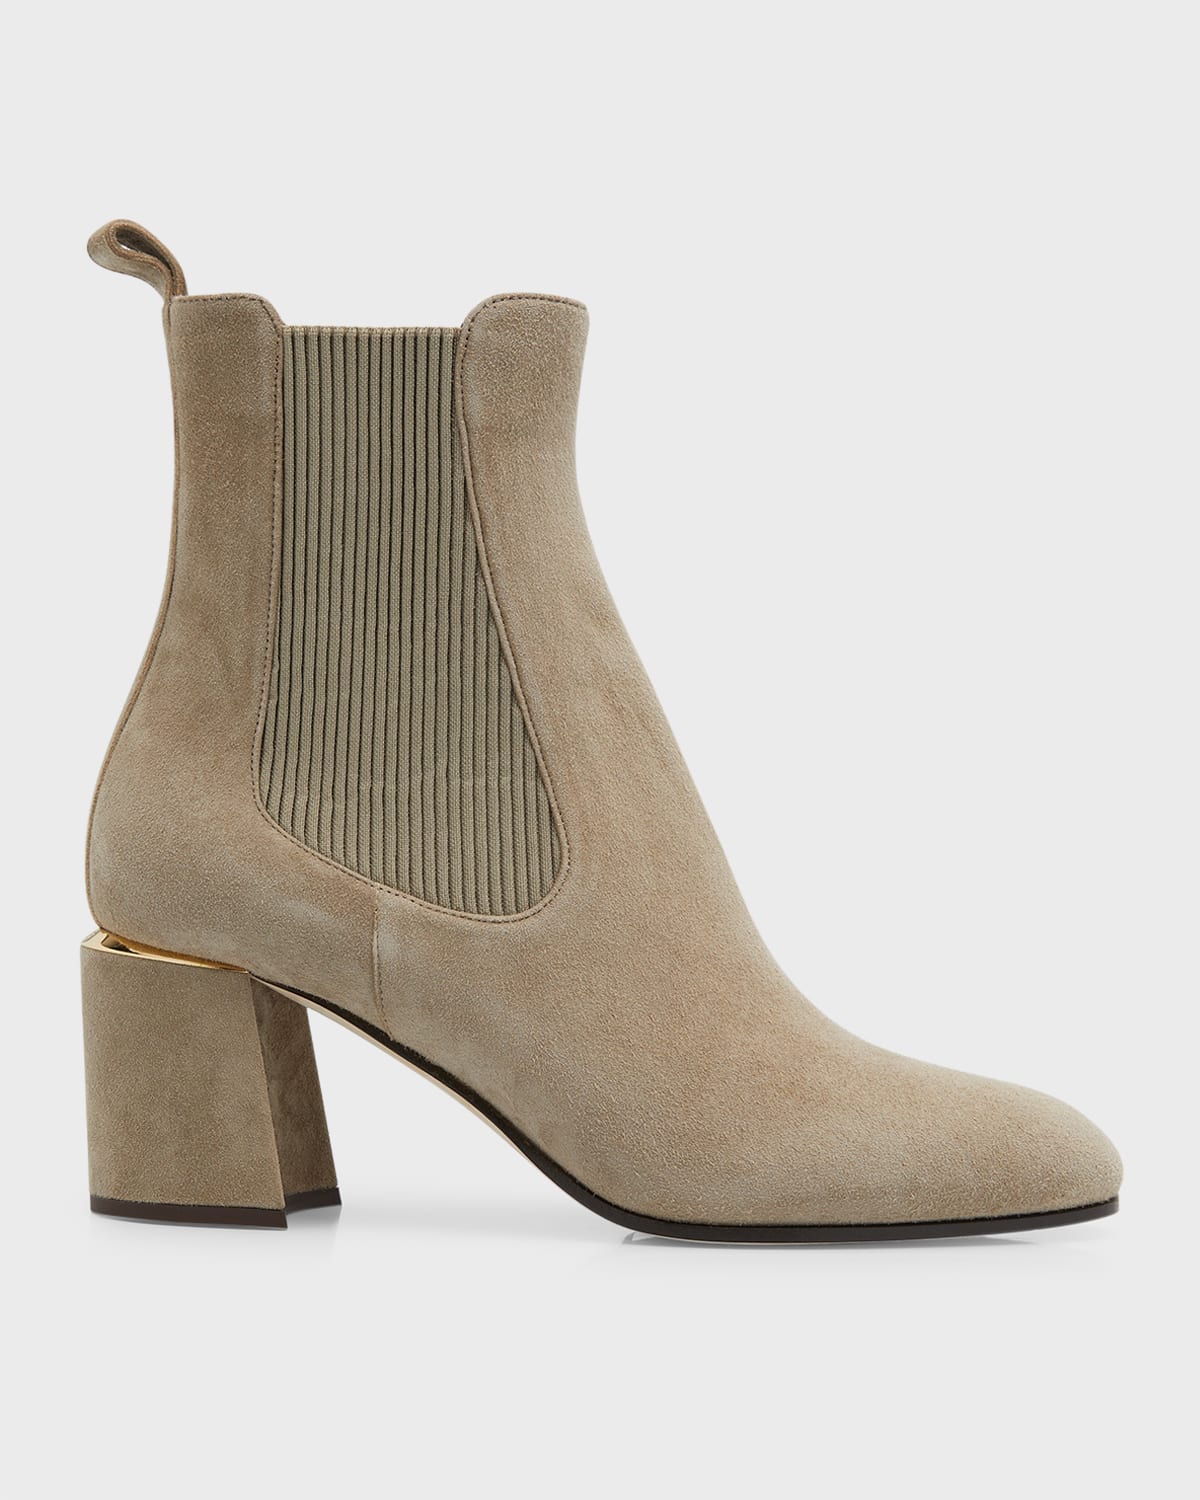 JIMMY CHOO THESSALY SUEDE CHELSEA ANKLE BOOTS